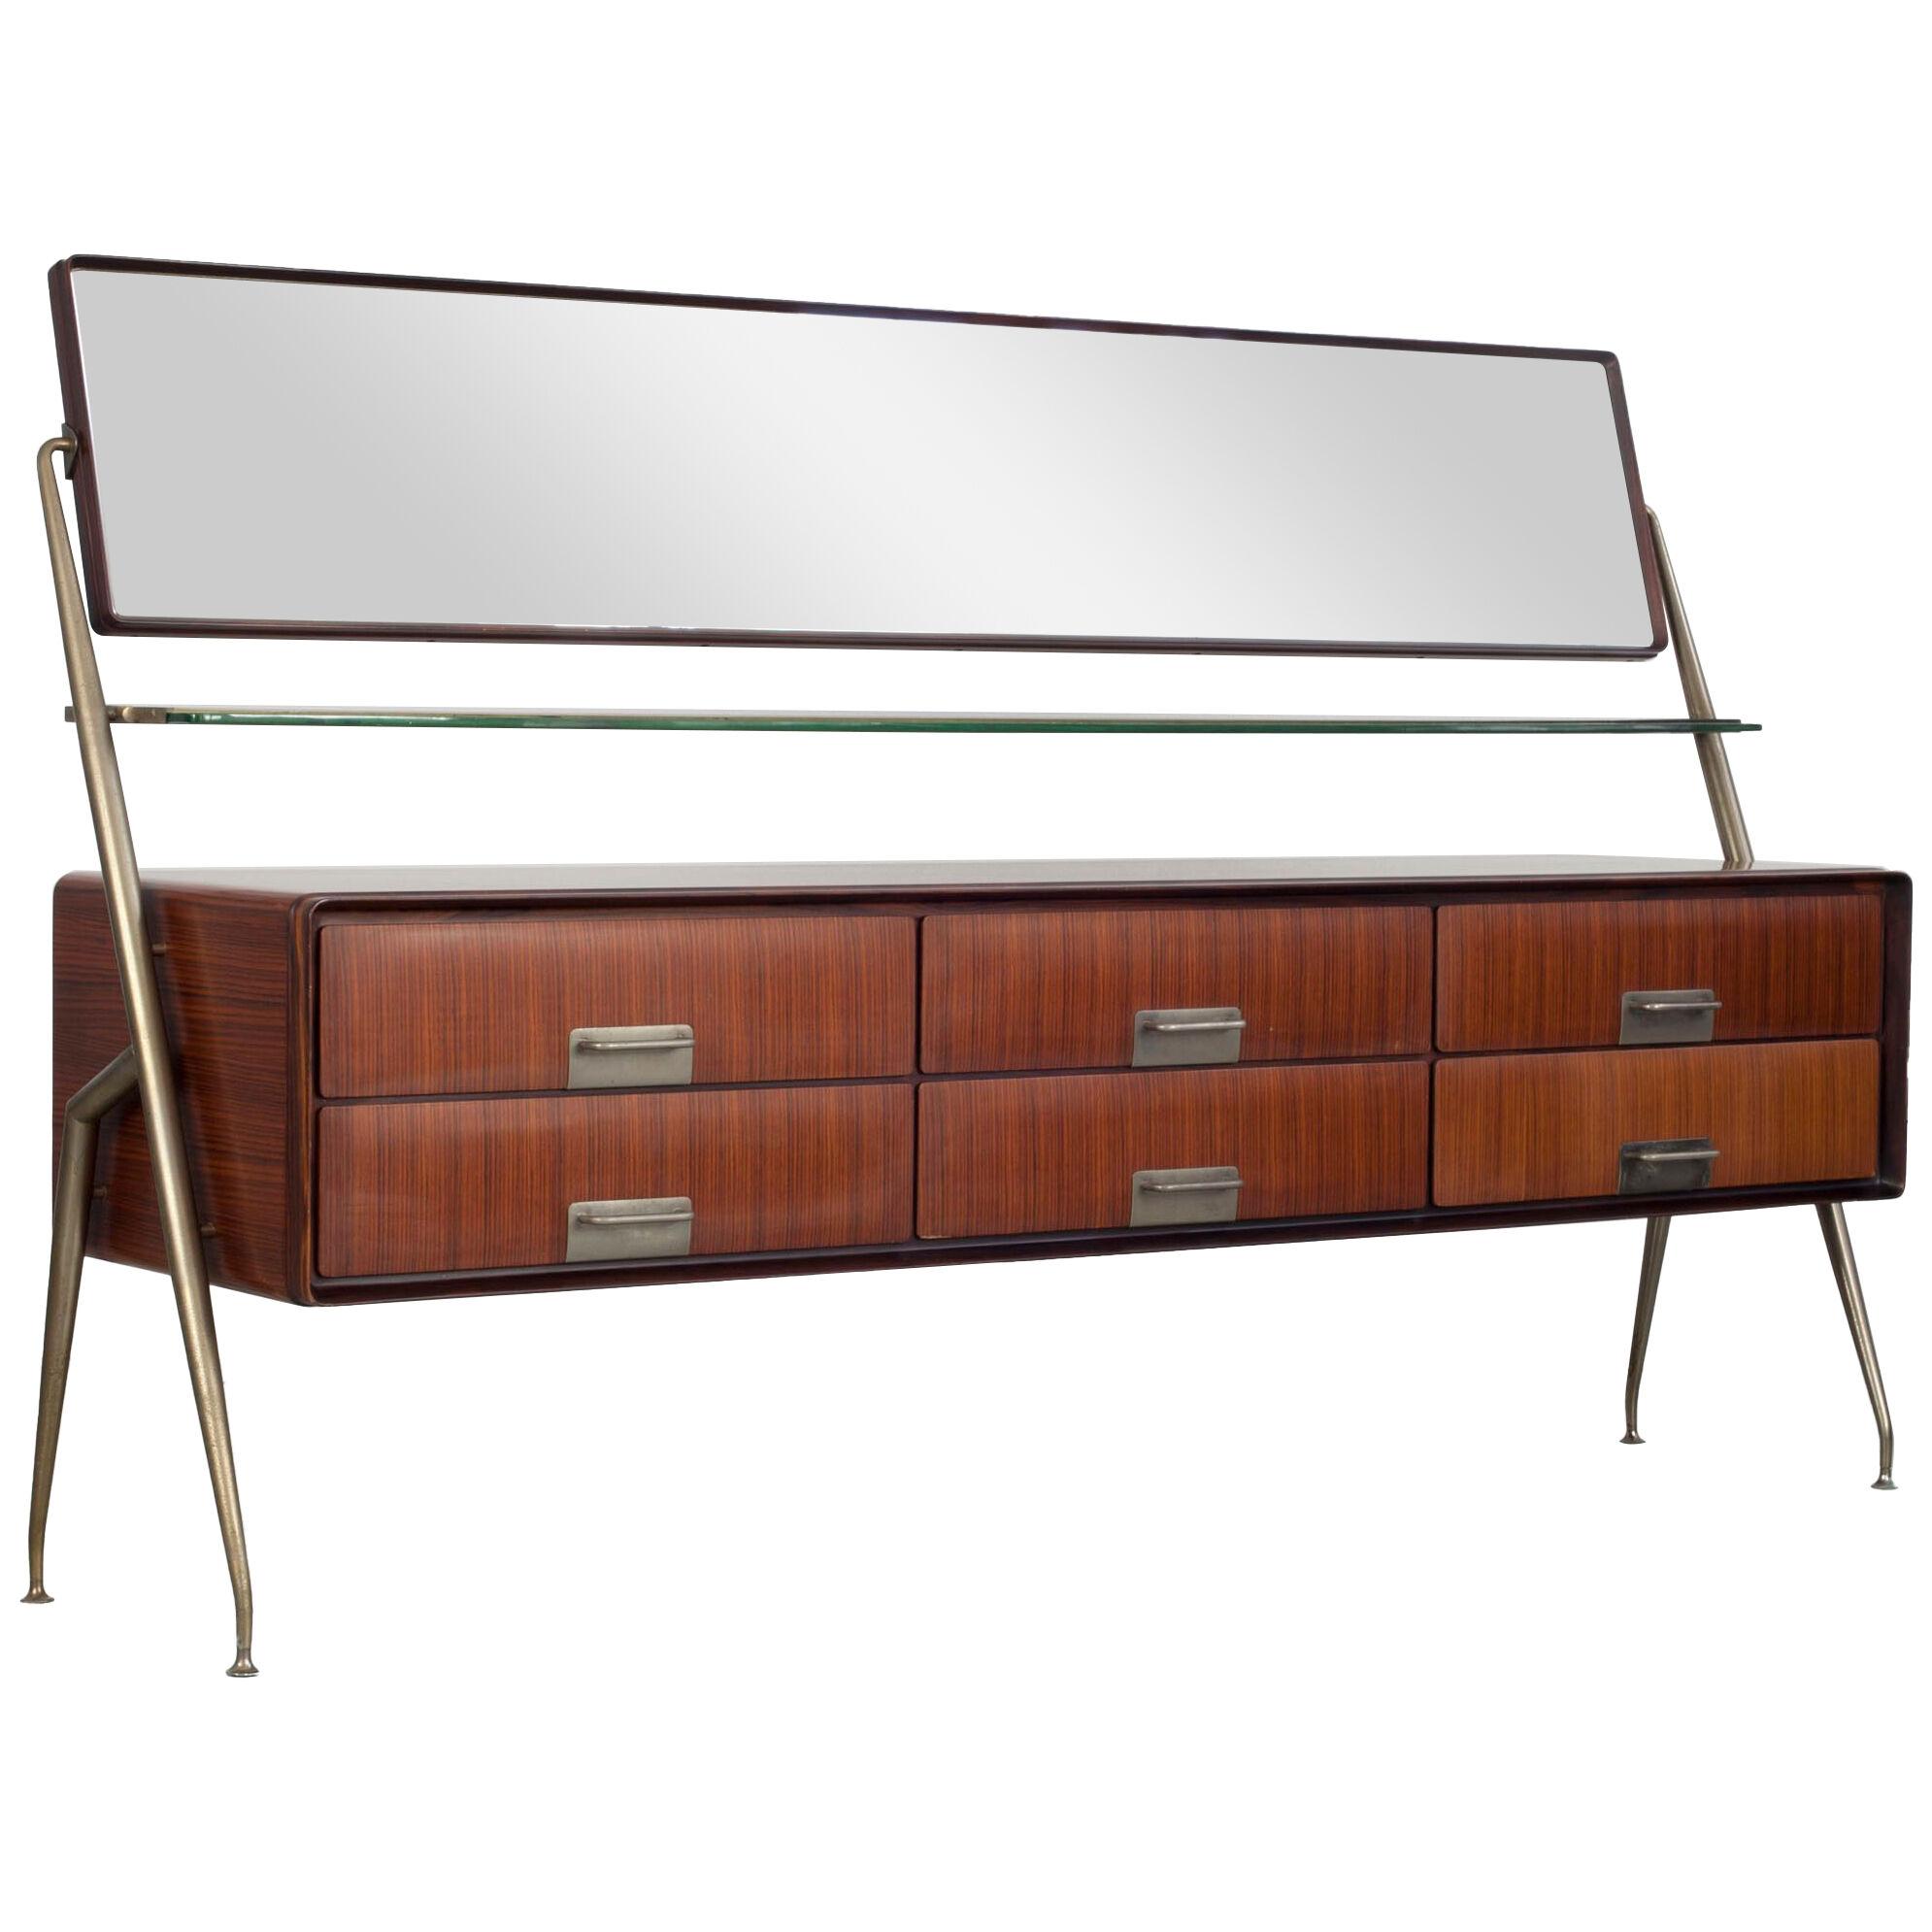 Silvio Cavatorta Sideboard with Drawers and Mirror, Italy 1950s